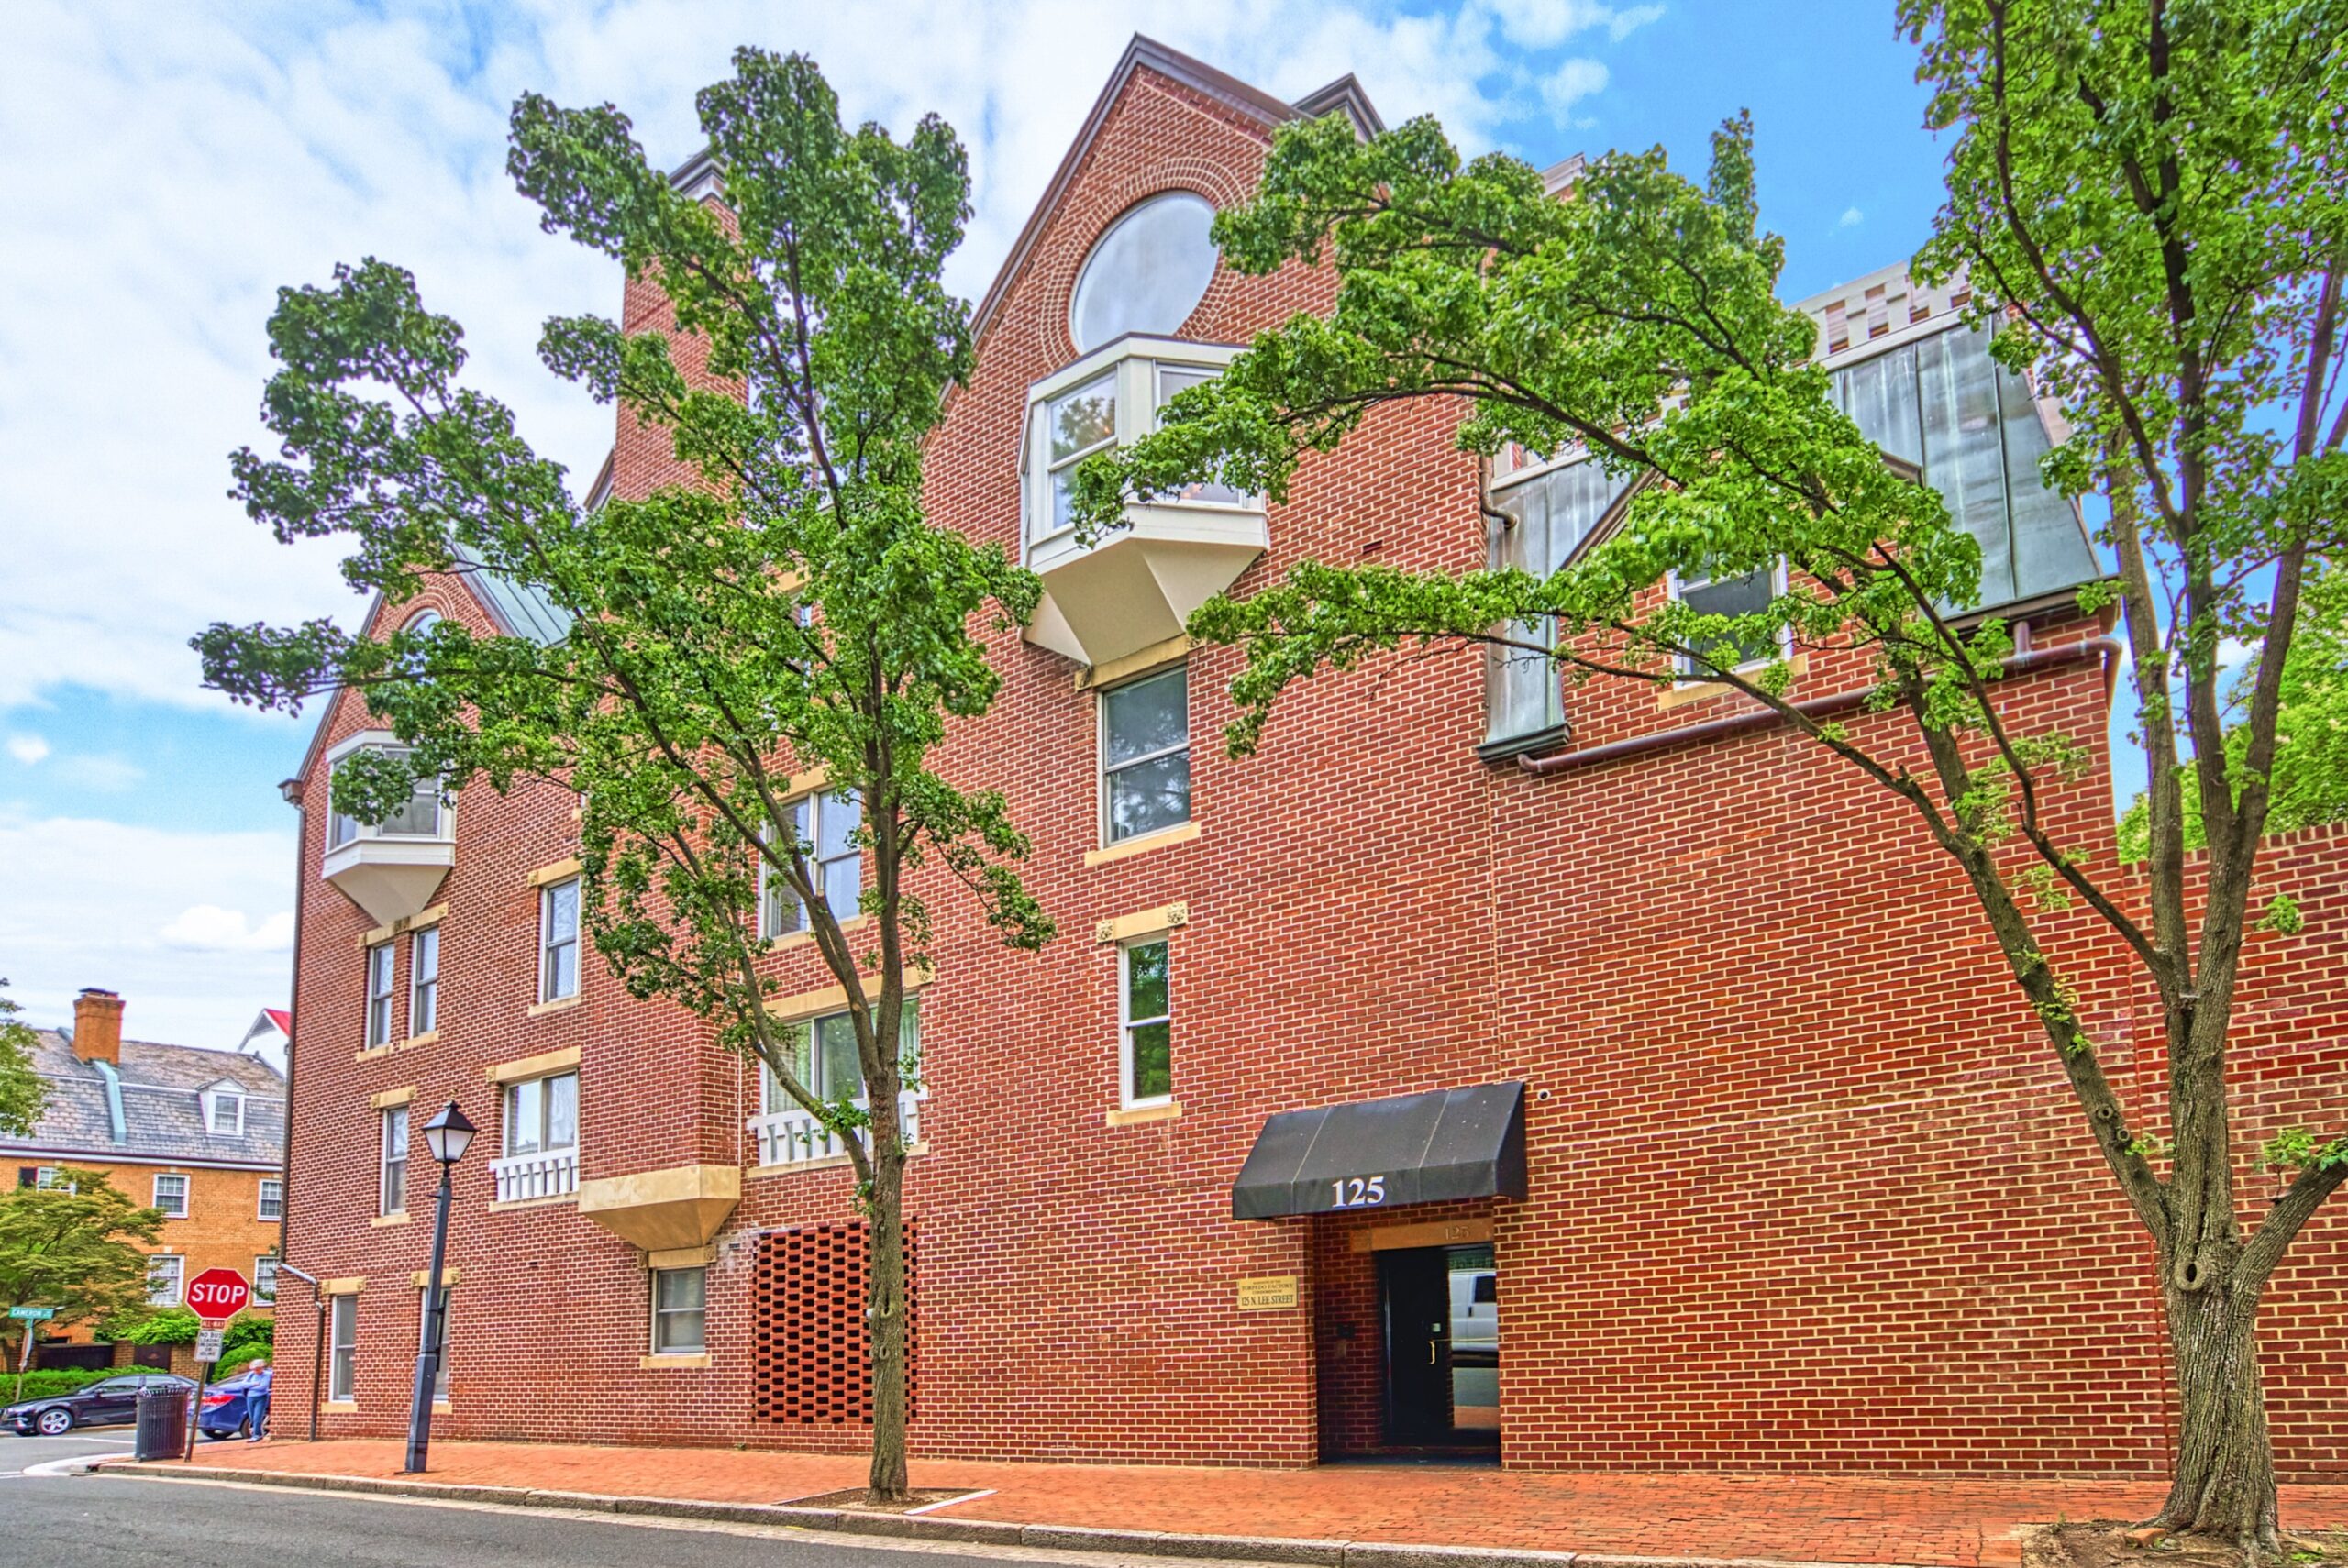 Professional exterior photo of 125 N Lee St, Alexandria, VA - showing the entry vestibule and brick side of the building and sidewalk